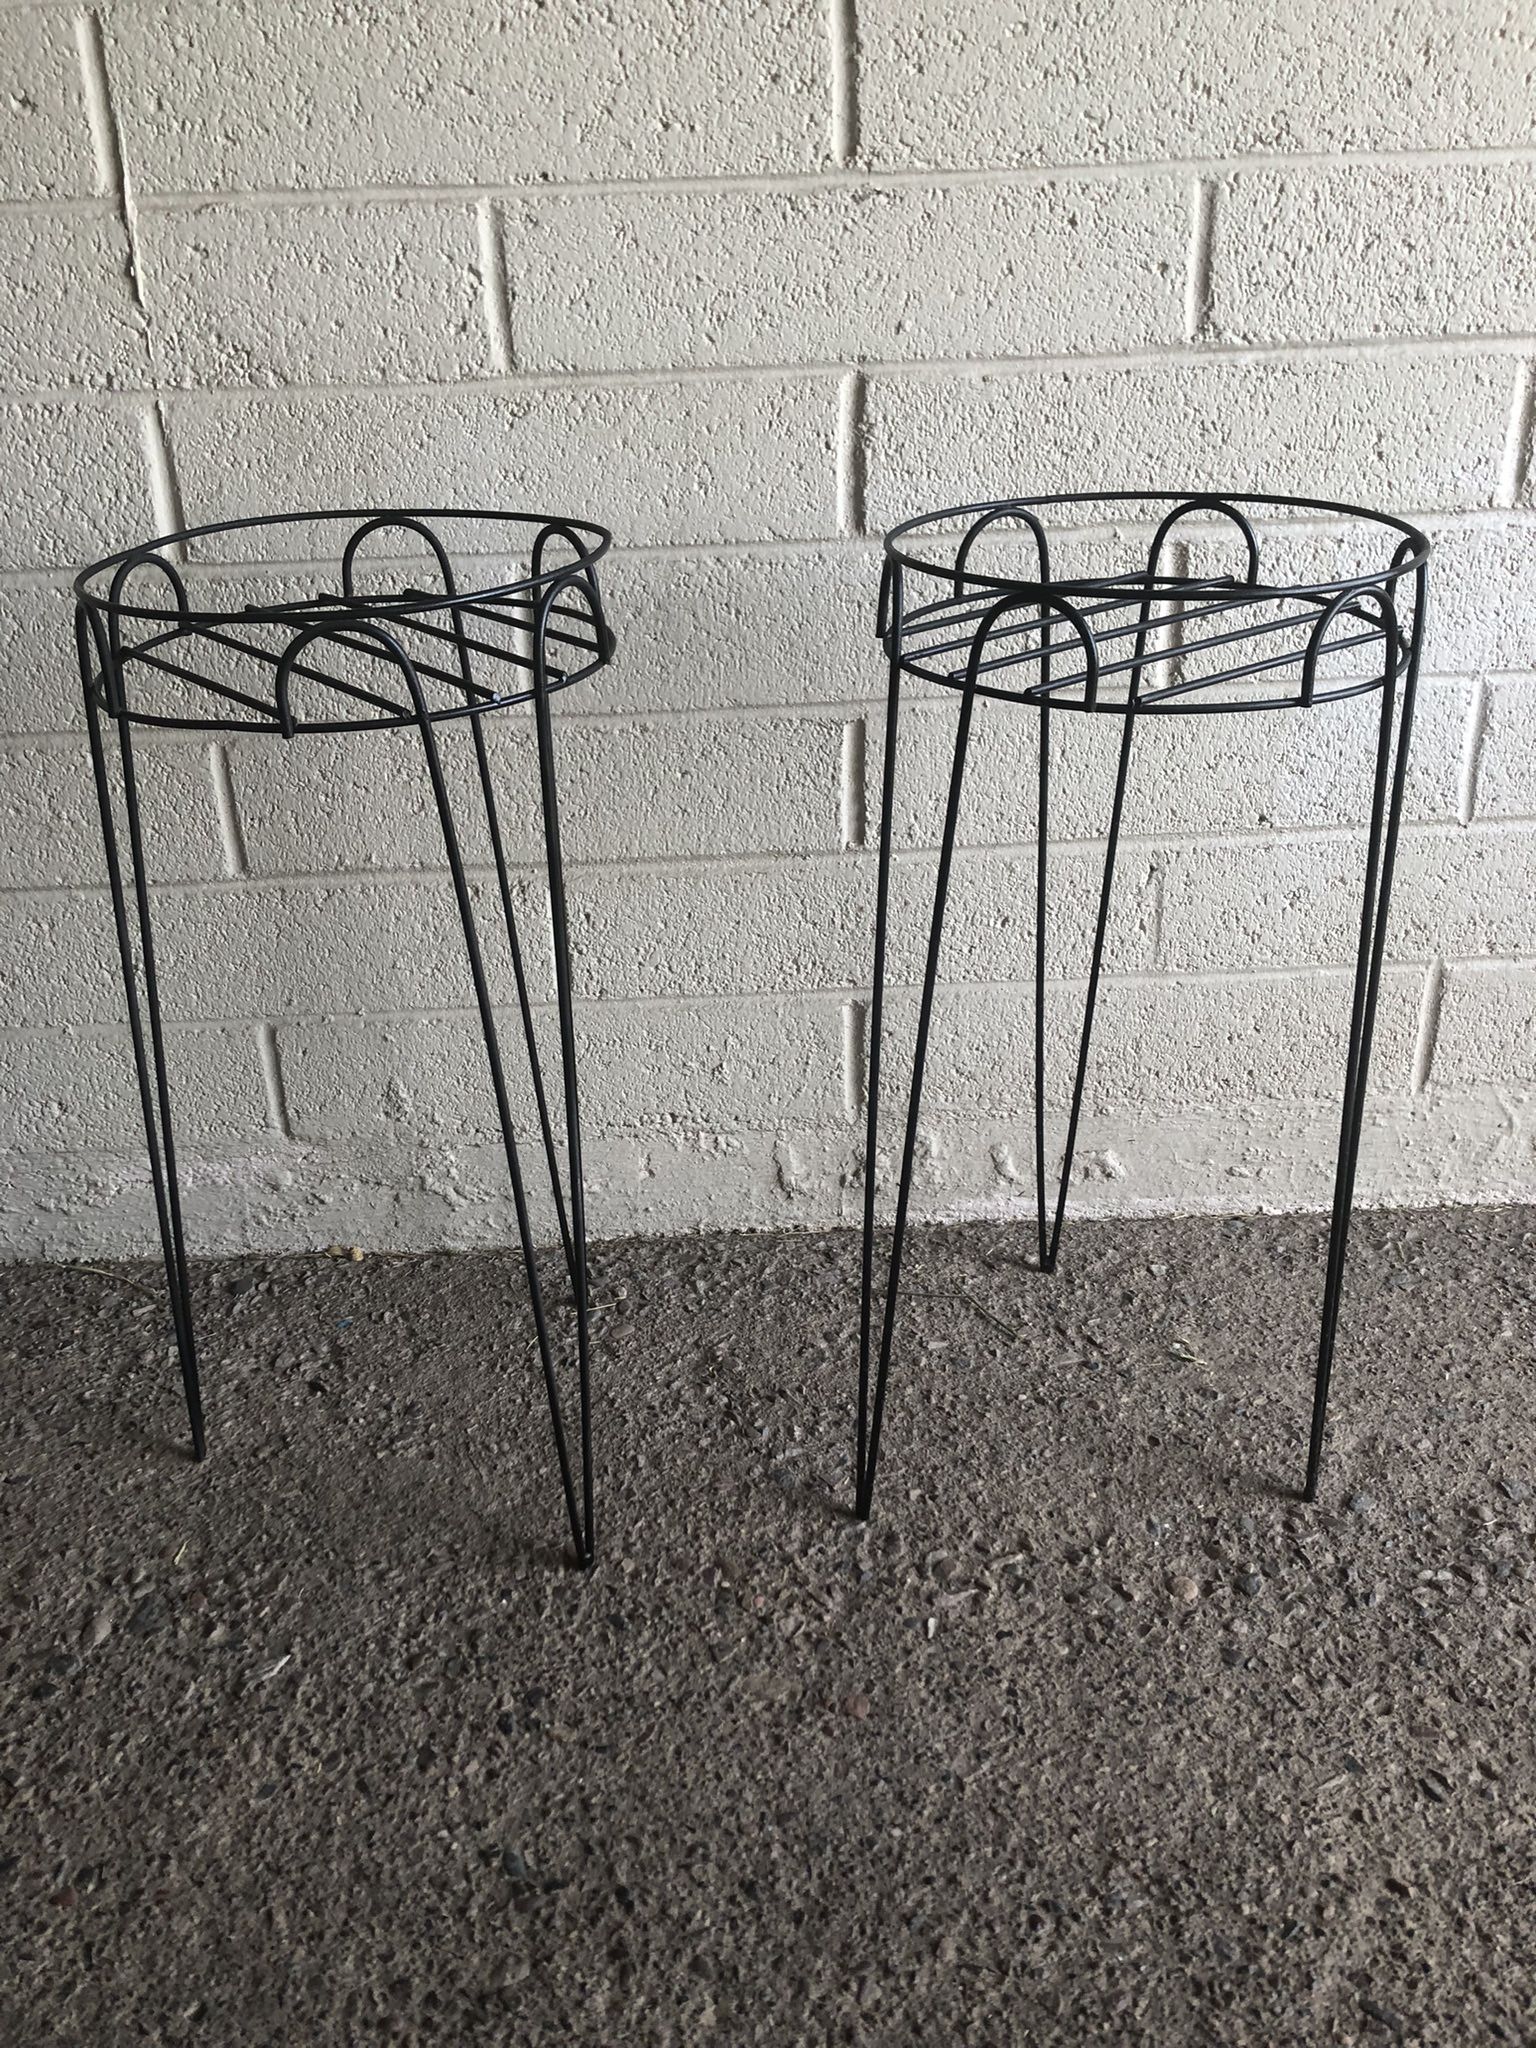 Pair Of Plant Stands